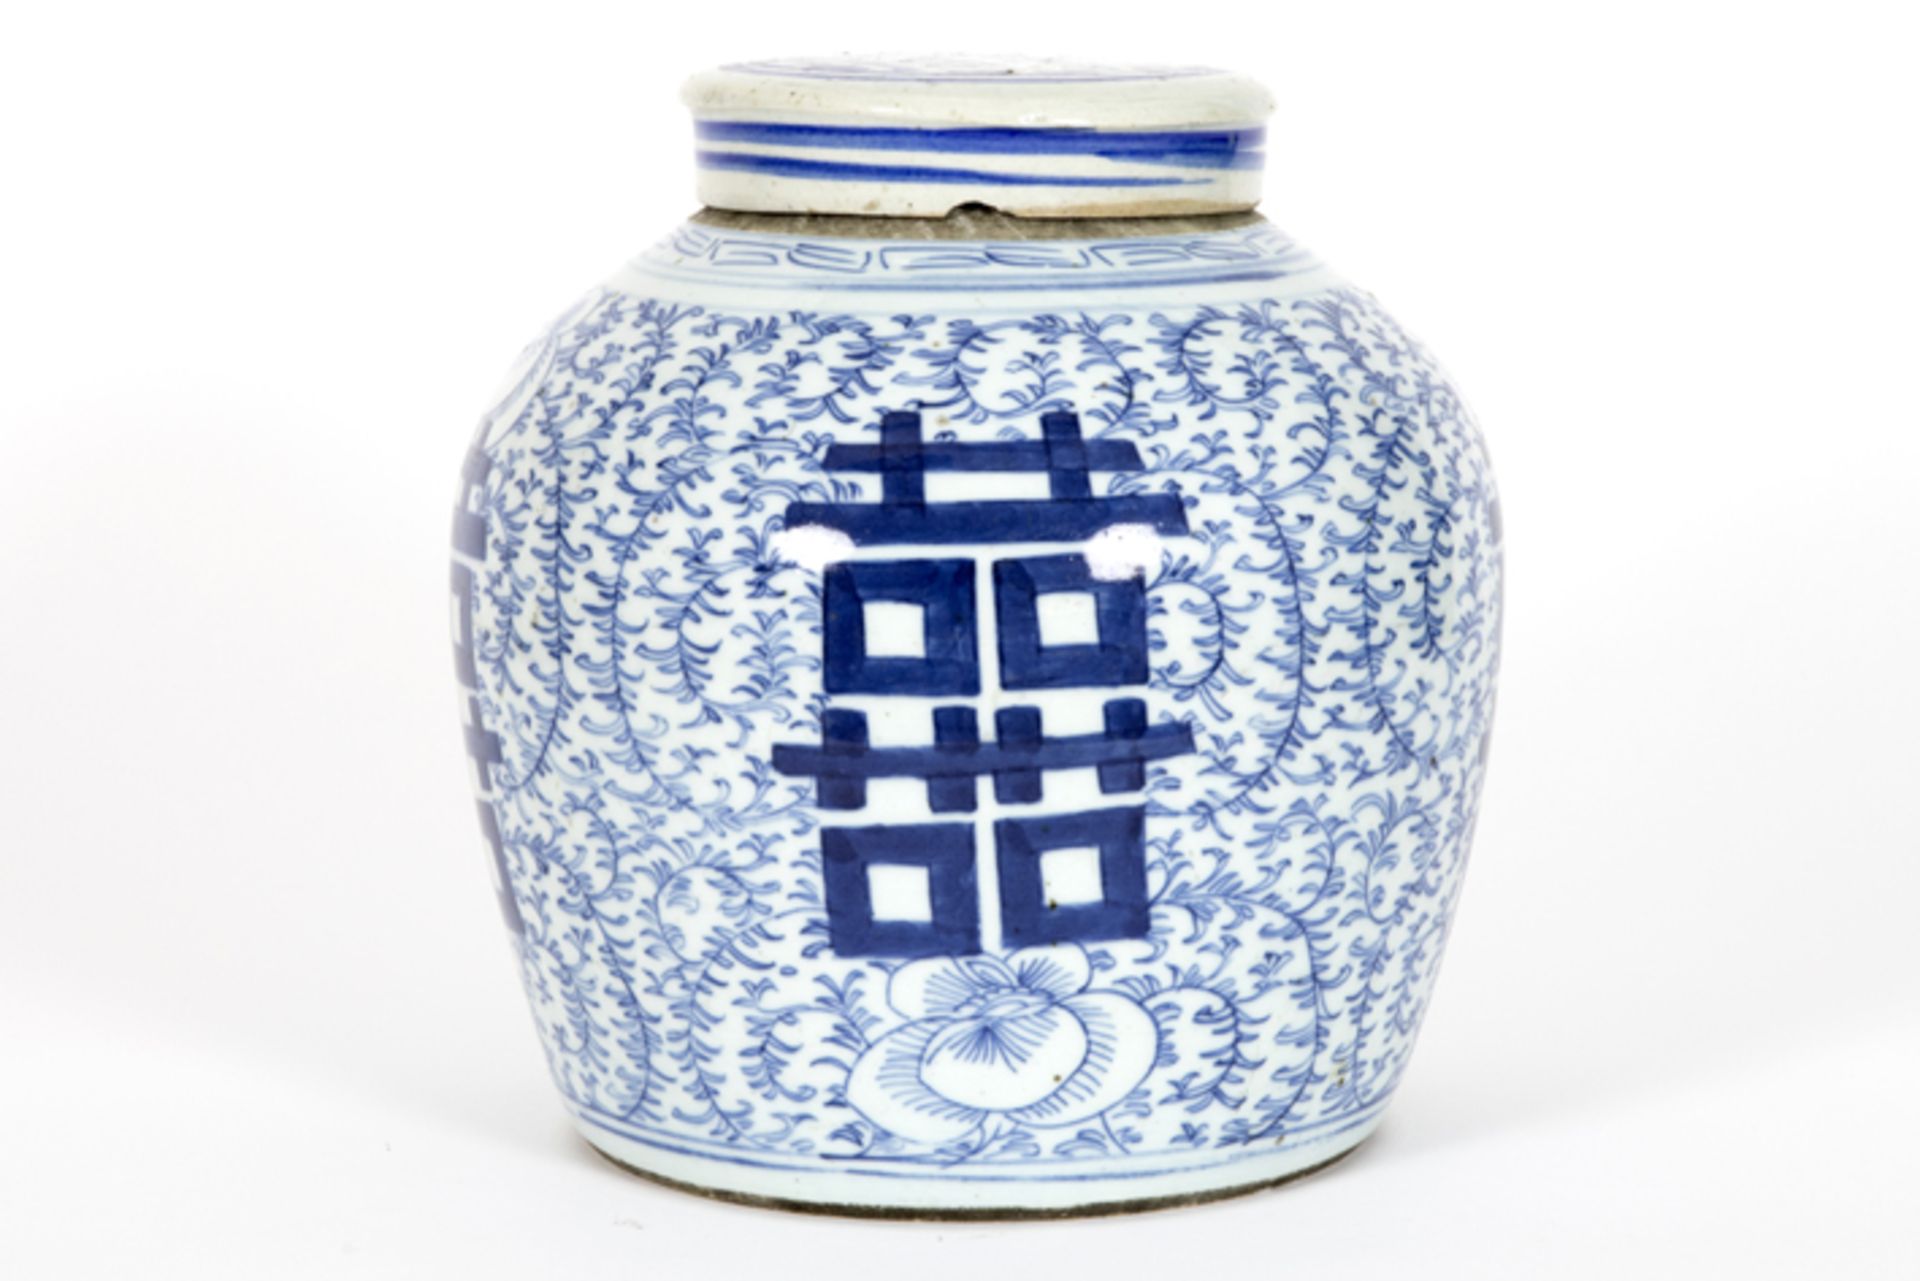 Chinese lidded ginger jar in porcelain with blue-white decor - - Chinese [...] - Image 2 of 4